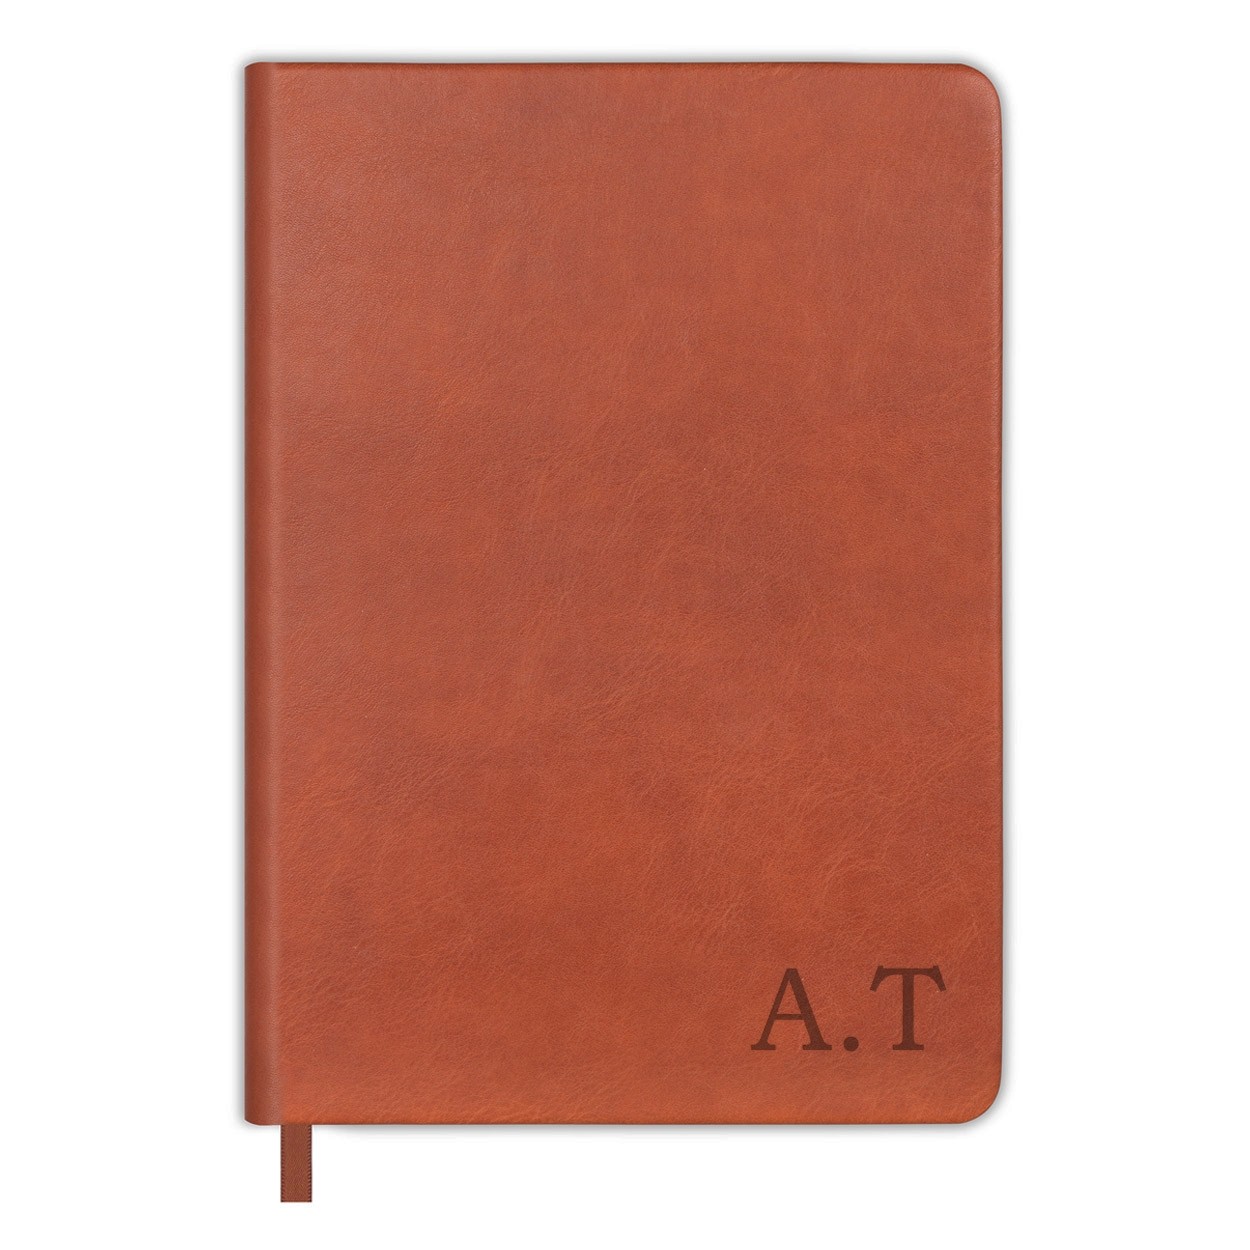 Personalised Custom Notebook Notepad Lined Size A5 PU Leather Effect Tan Any Name Initials